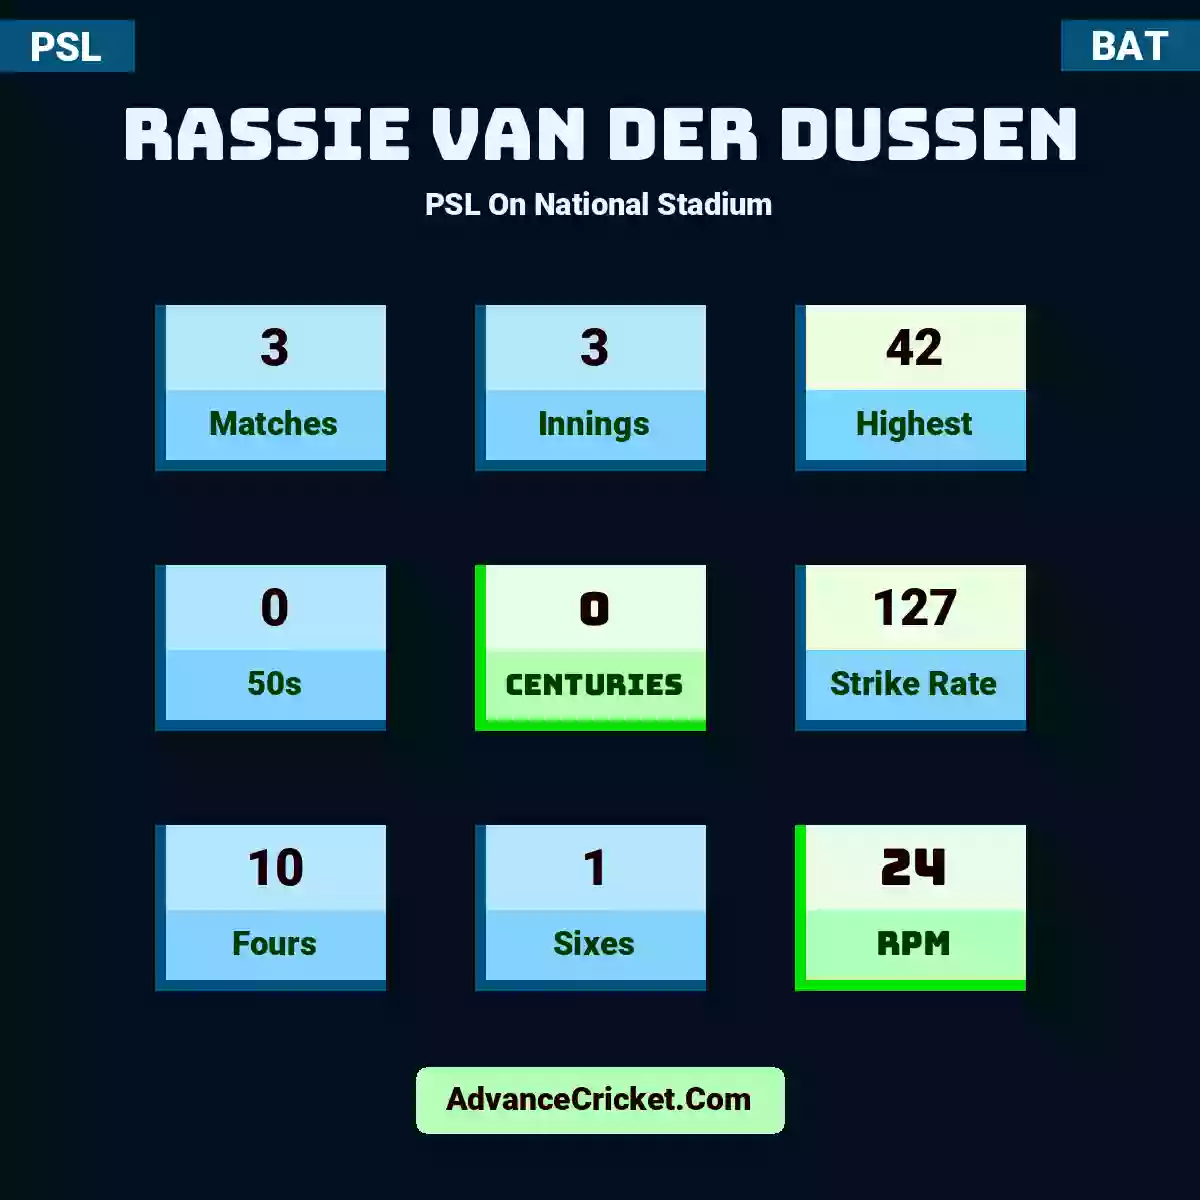 Rassie van der Dussen PSL  On National Stadium, Rassie van der Dussen played 3 matches, scored 42 runs as highest, 0 half-centuries, and 0 centuries, with a strike rate of 127. R.Dussen hit 10 fours and 1 sixes, with an RPM of 24.